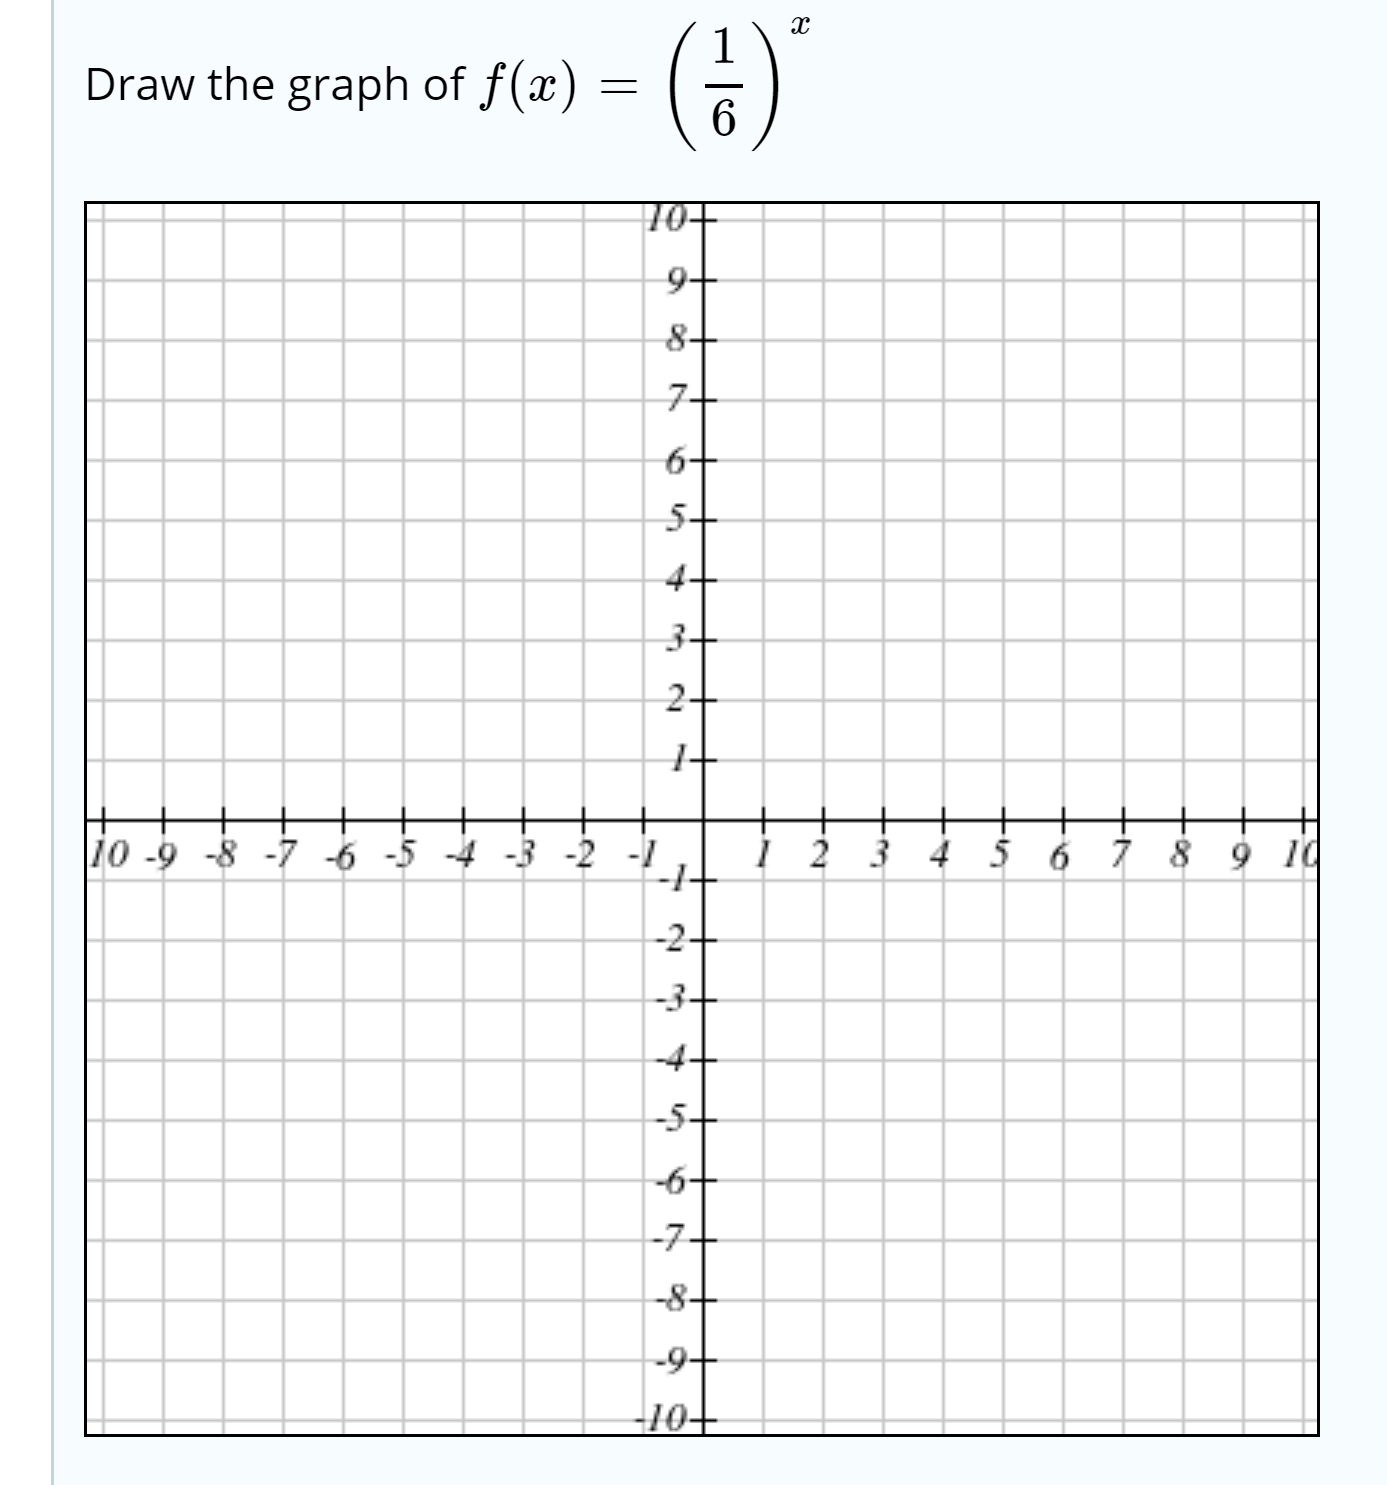 (a)
Draw the graph of f(x)
